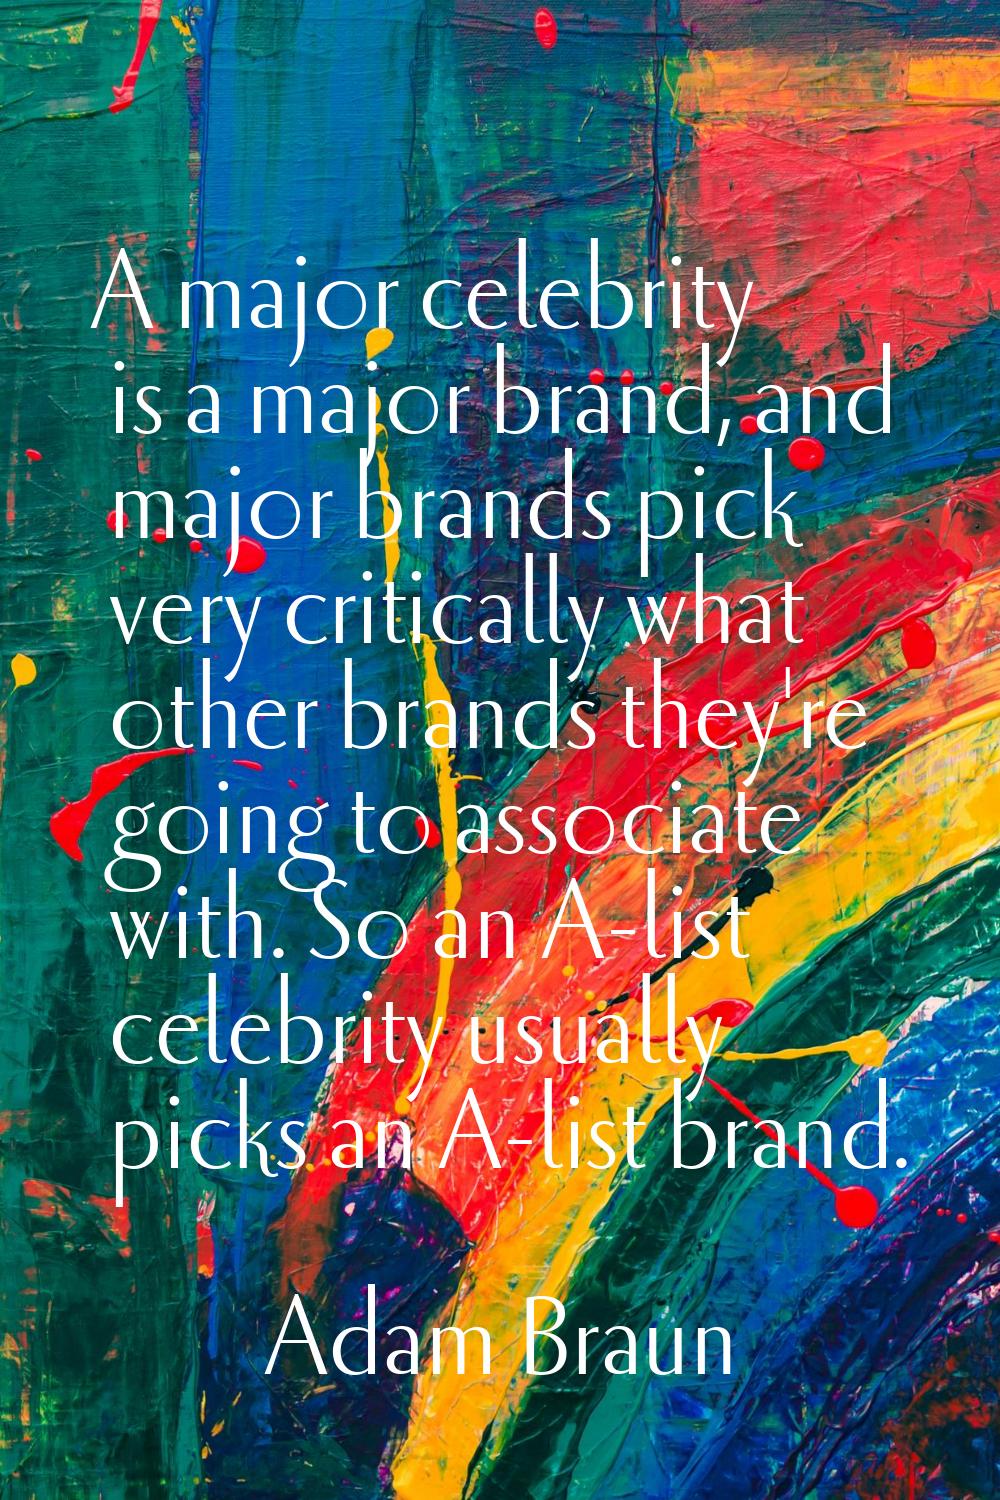 A major celebrity is a major brand, and major brands pick very critically what other brands they're